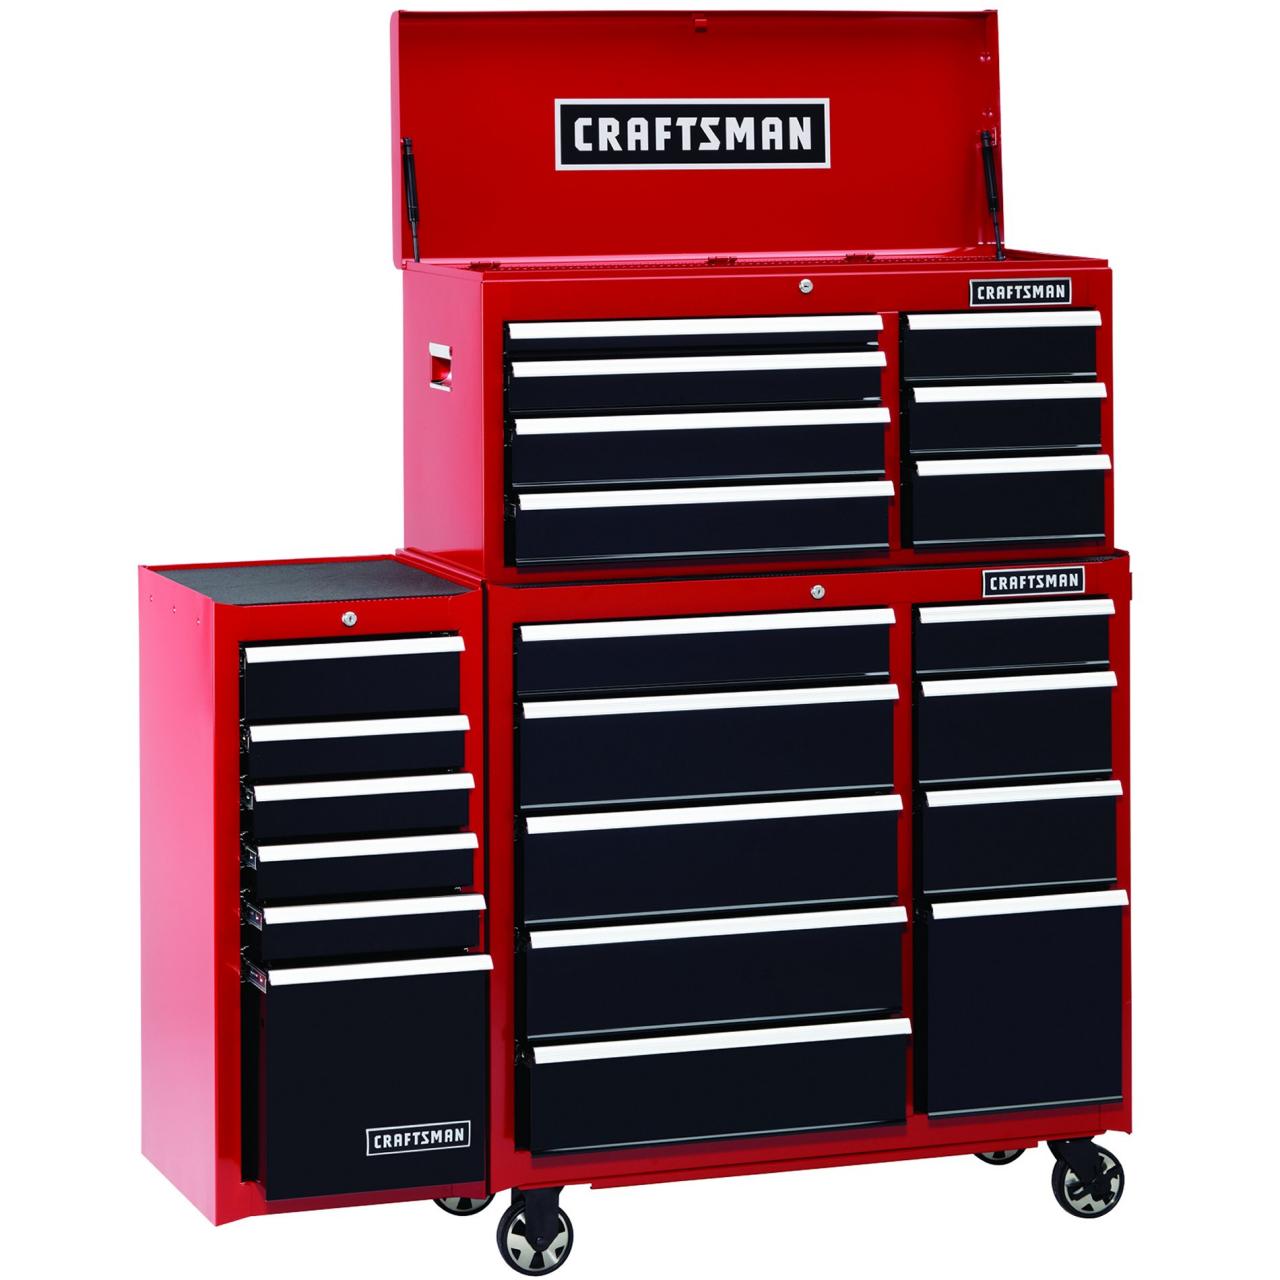 Craftsman 6-Drawer Heavy-Duty Ball Bearing Side Cabinet - Red/Black